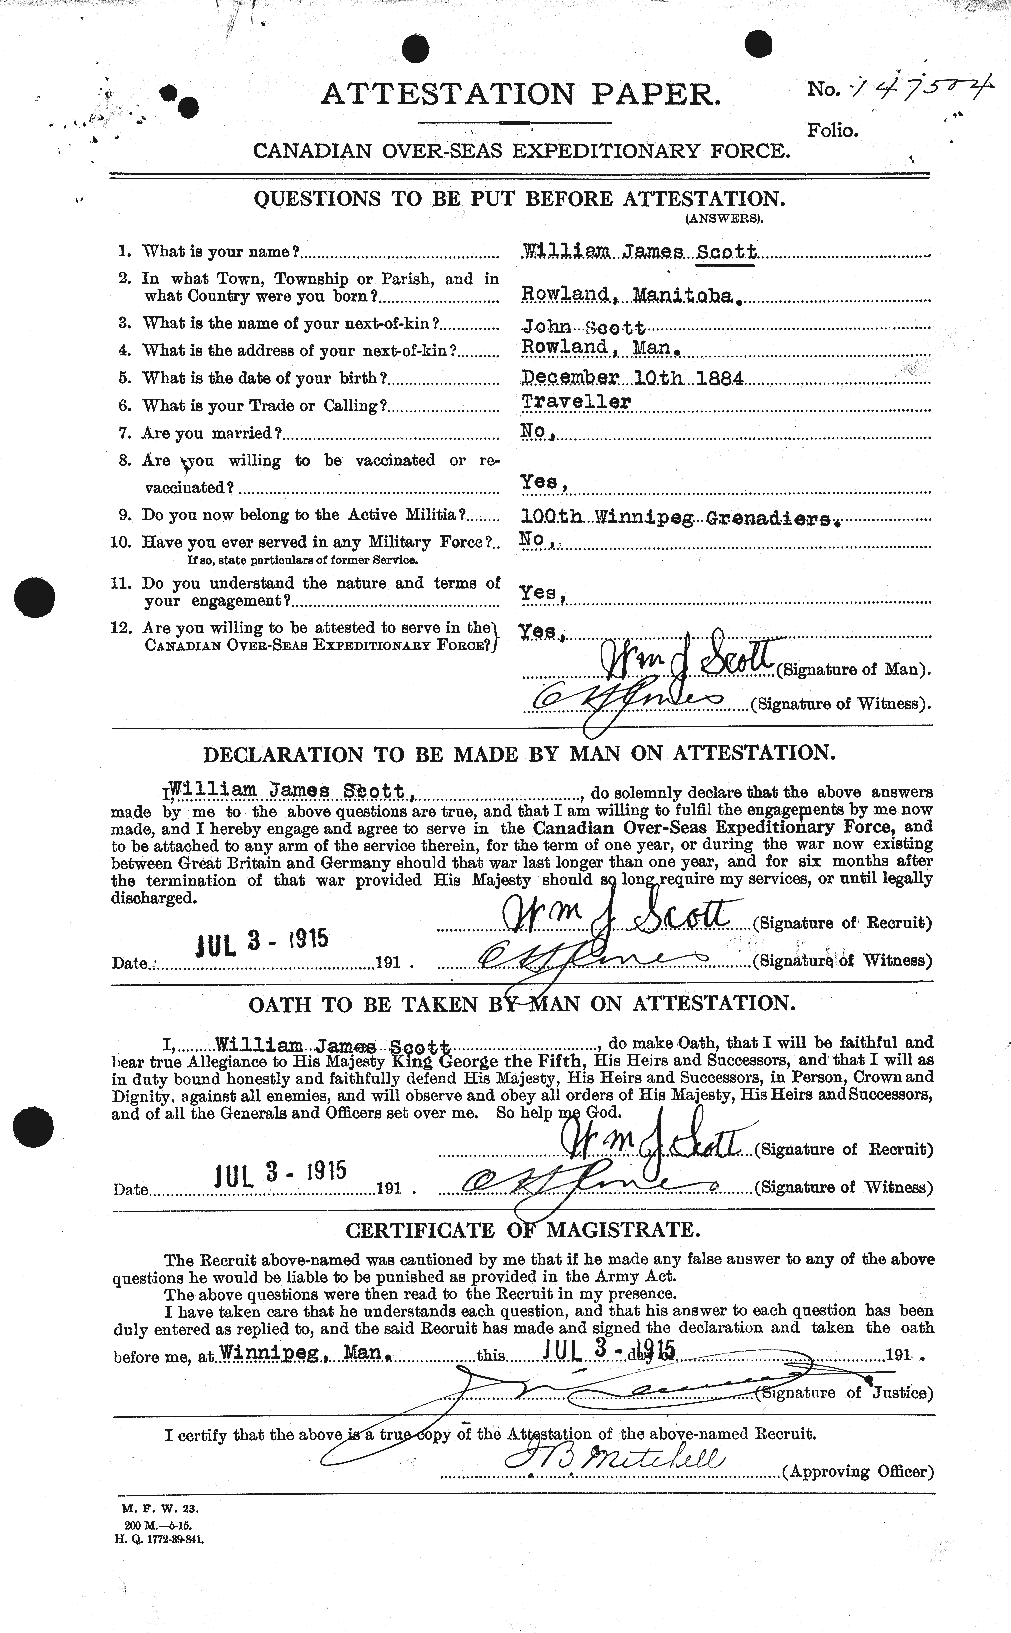 Personnel Records of the First World War - CEF 086772a